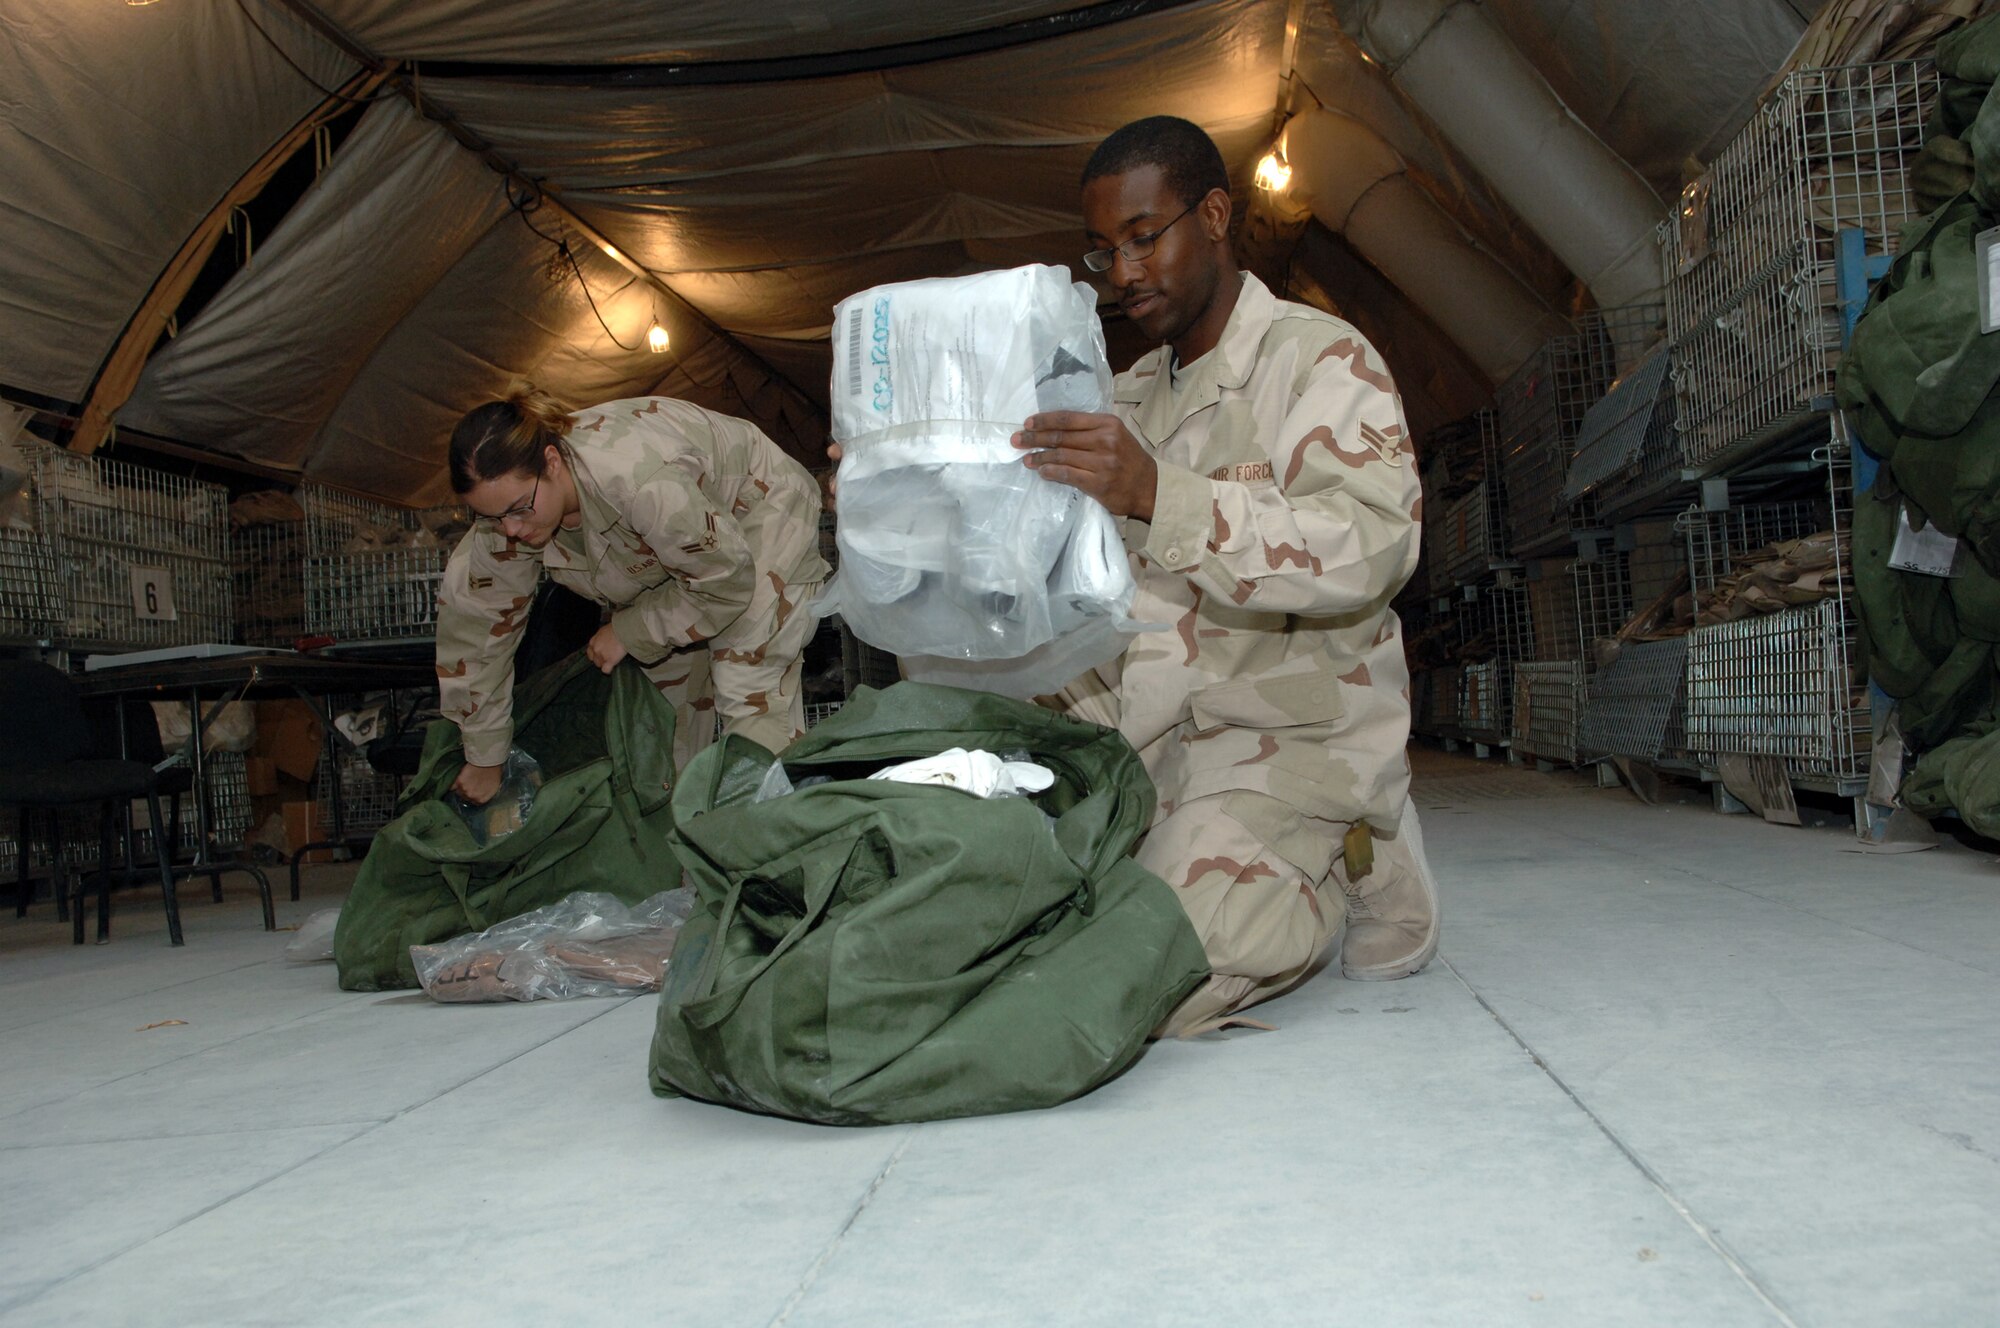 Two Airmen passing through the 379th Air Expeditionary Wing on their way to Iraq go through mobility bags issued to them at the Expeditionary Theater Deployment Center, ensuring all the equipment matches their inventory sheets. (U.S. Air Force photo by Master Sgt. Ken Stephens)